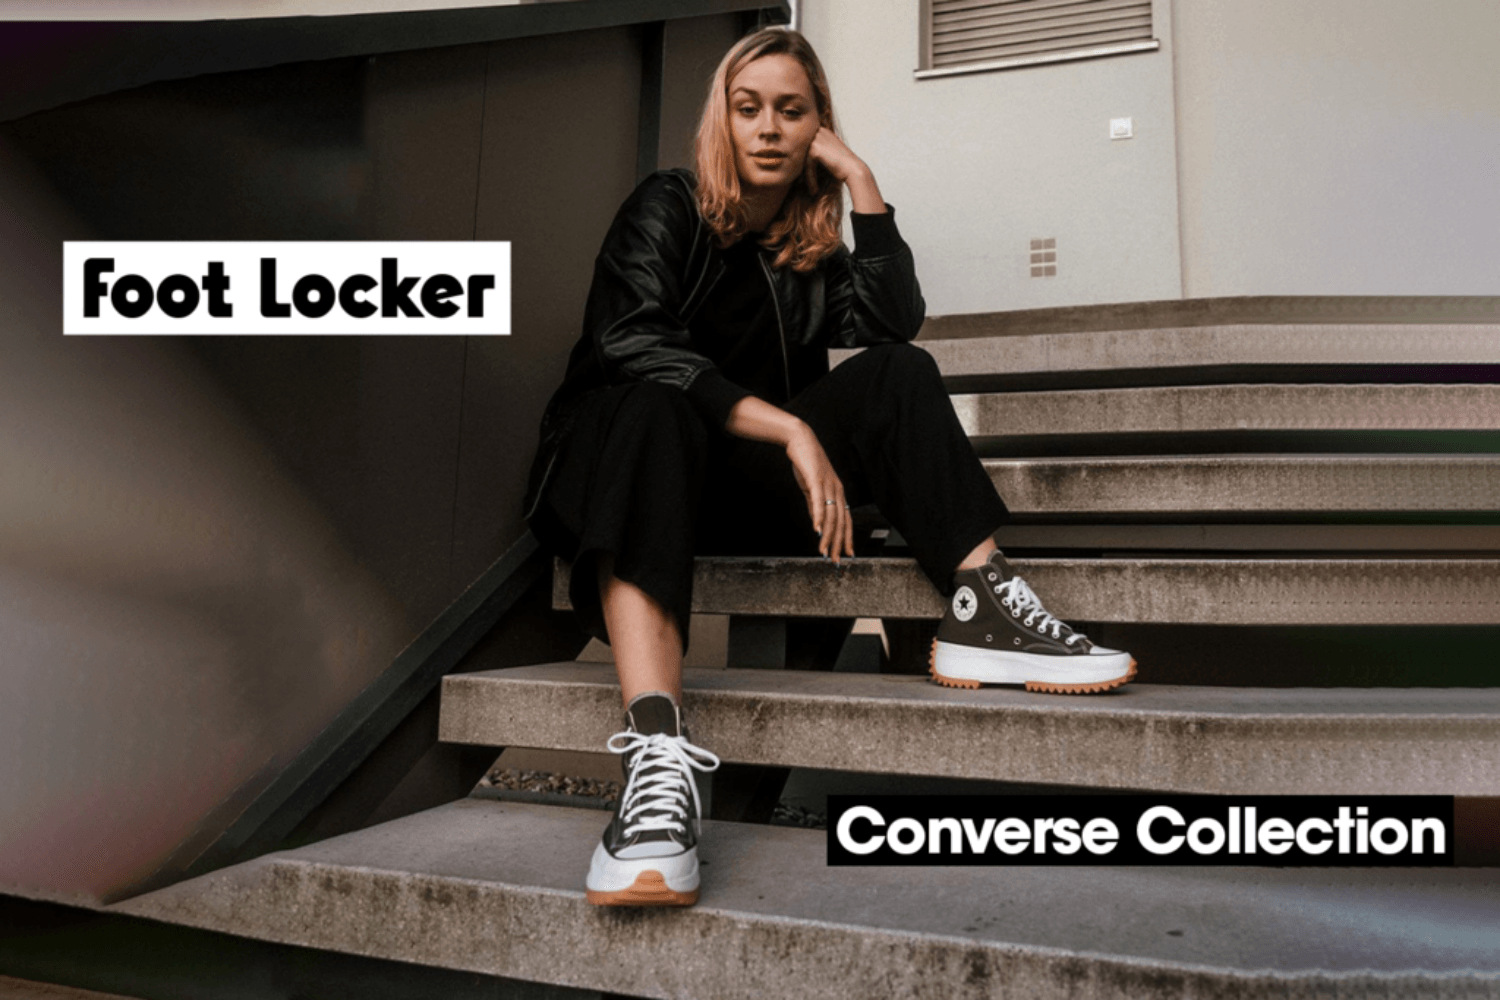 Shop the Converse collection at Foot Locker